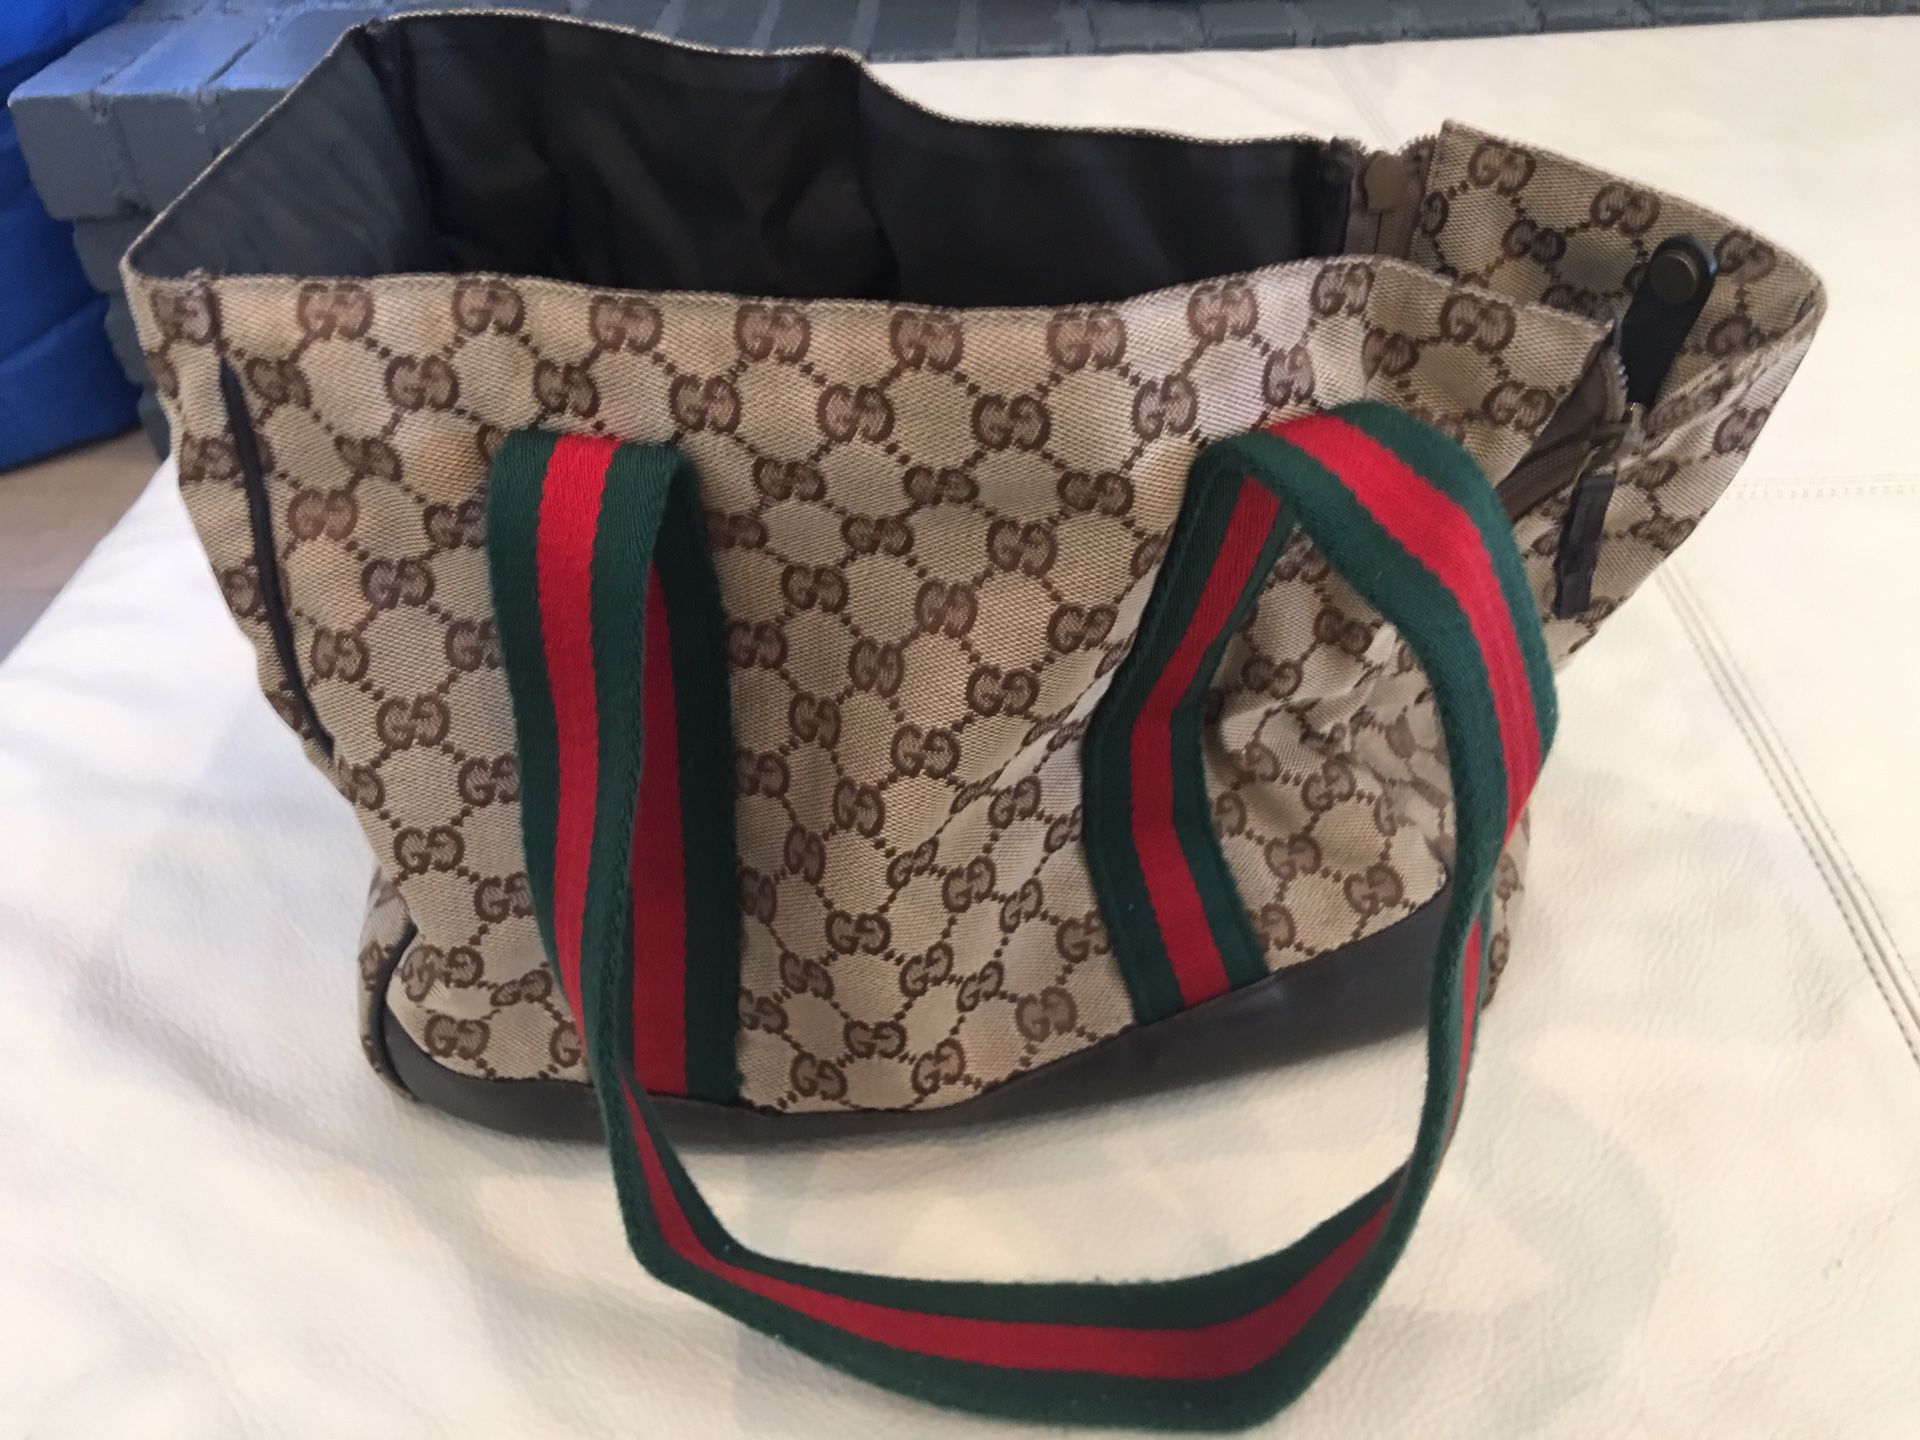 Authentic Gucci Dog Carrier